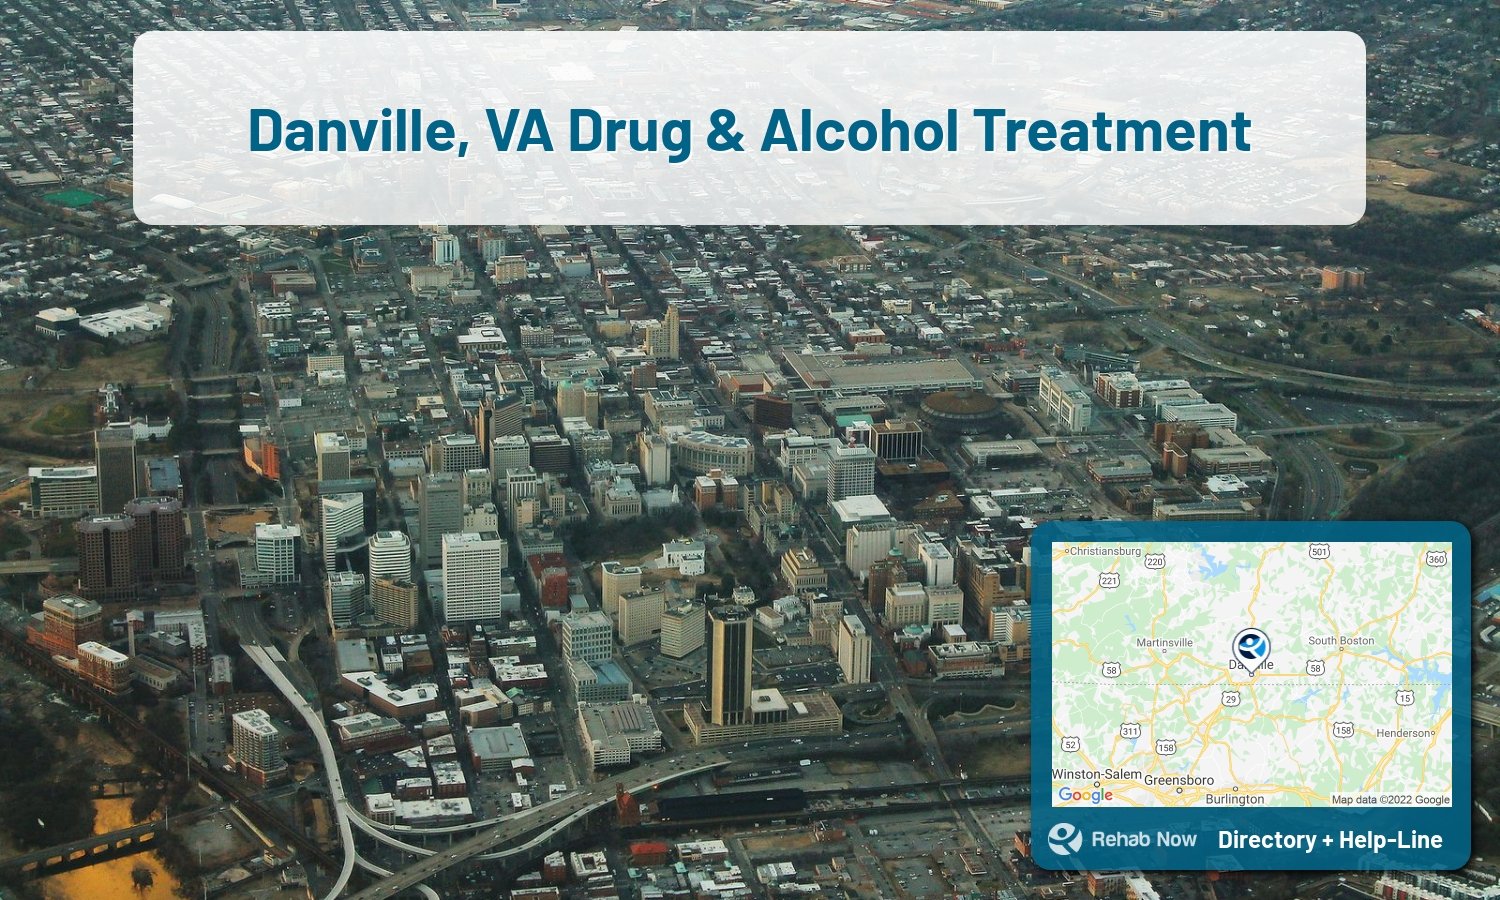 Danville, VA Treatment Centers. Find drug rehab in Danville, Virginia, or detox and treatment programs. Get the right help now!